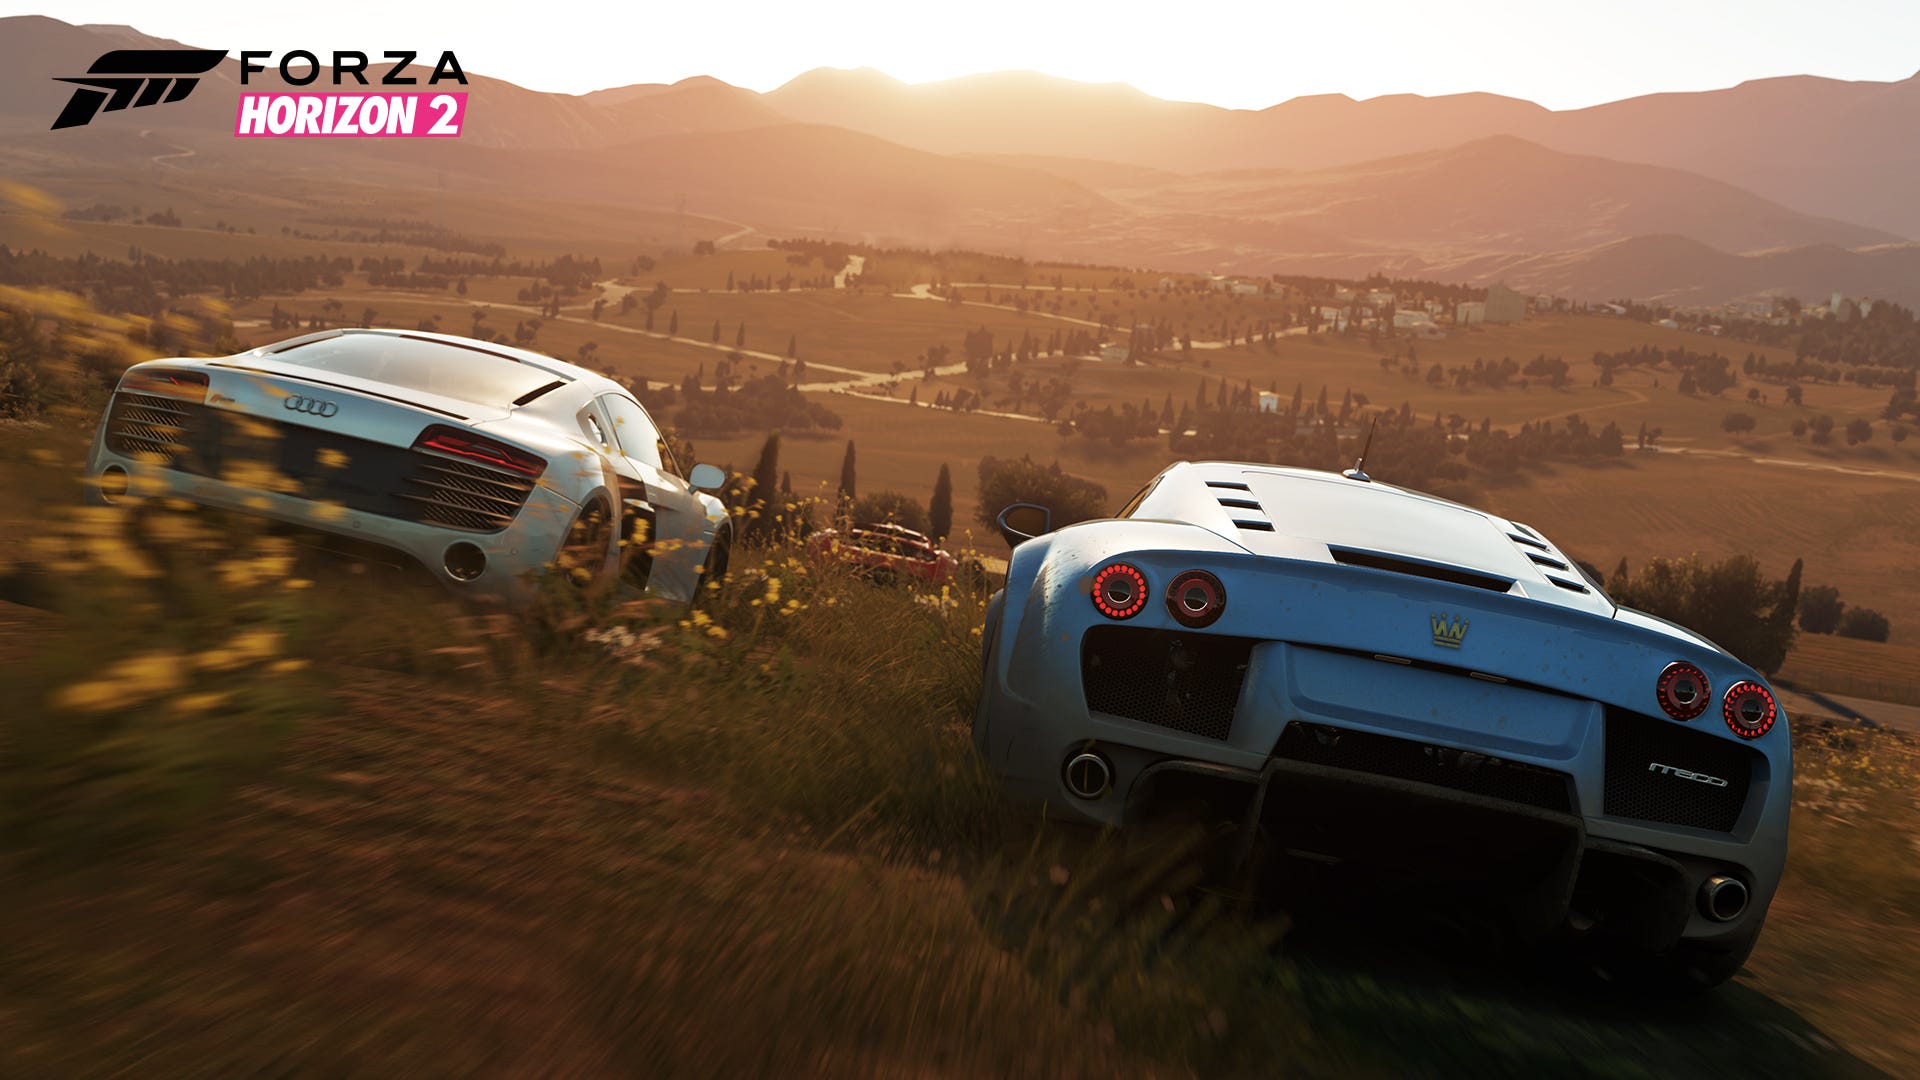 Leger Pelmel Goodwill Forza Horizon 2 Xbox One Review: One of the All-Time Great Racers | VG247